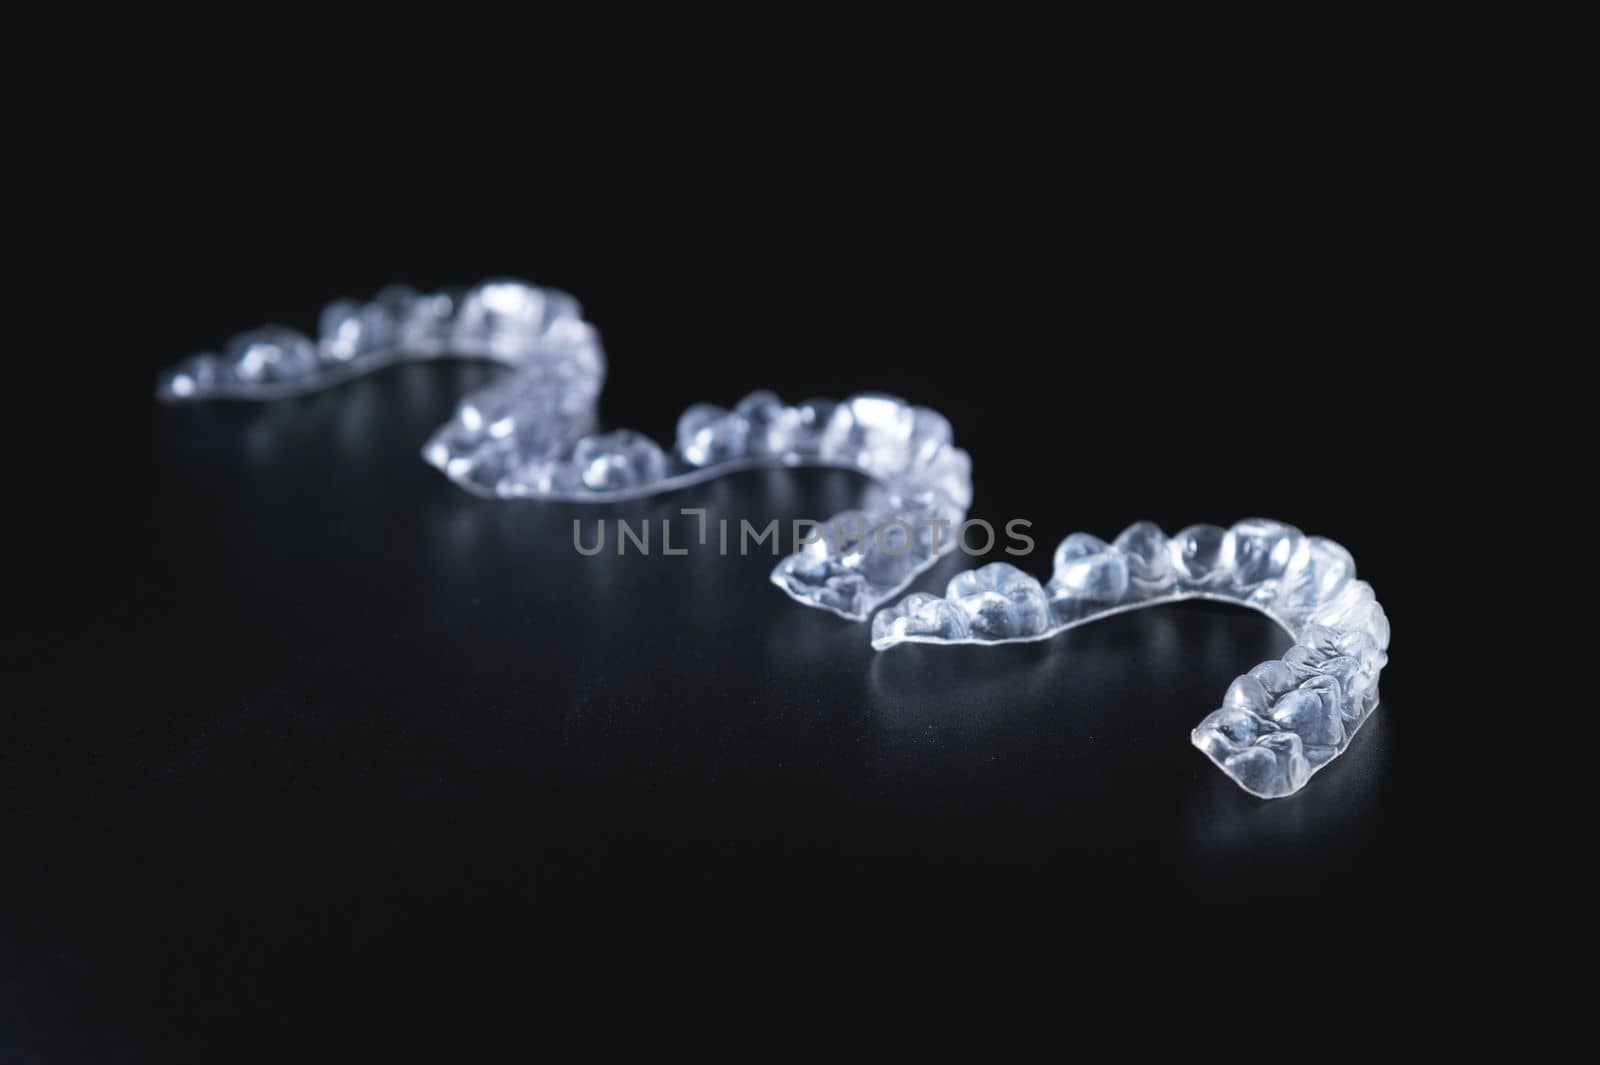 three invisible plastic aligners lie next to each other on a black background by yanik88